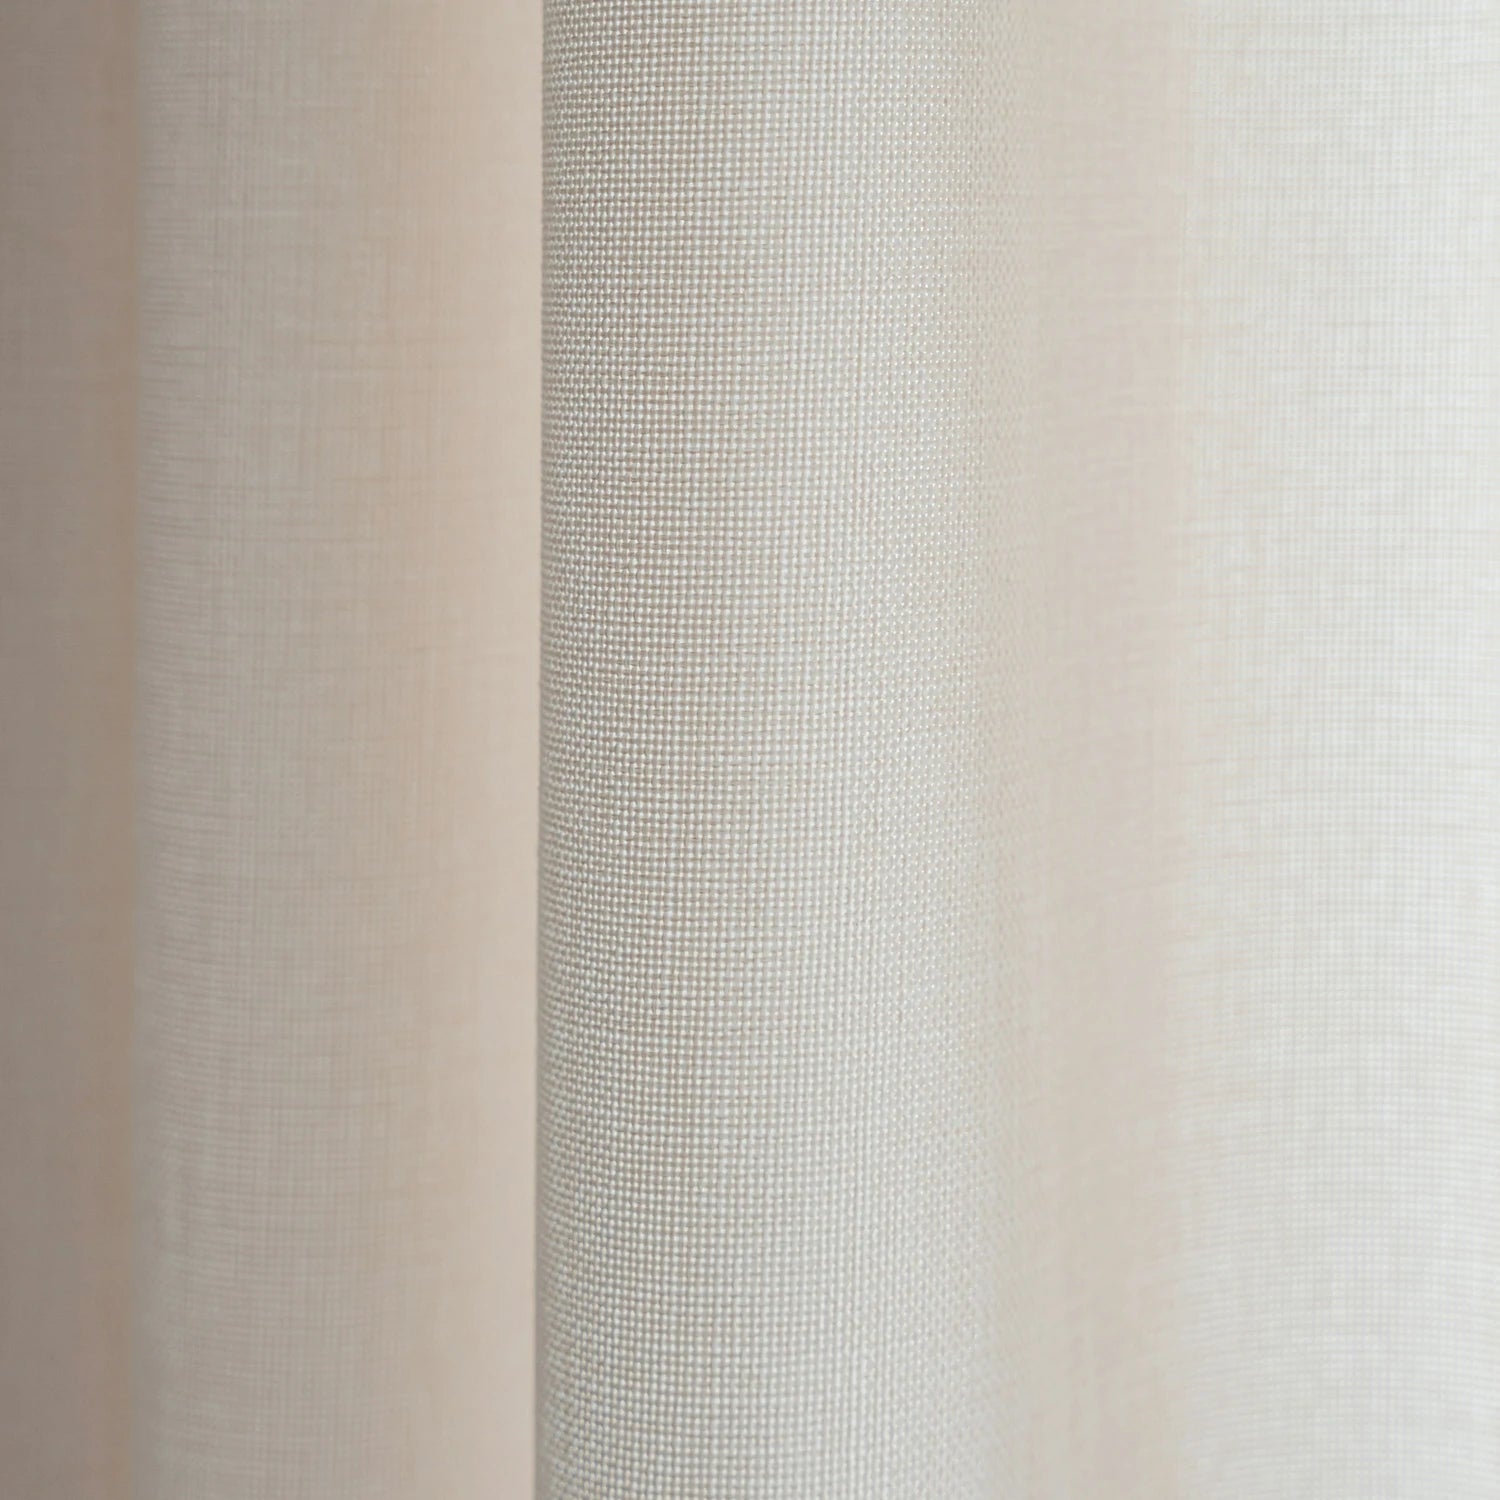 Dandelion Polyester Pinch Pleat Drapery Custom Curtains Blackout Curtains Beige White